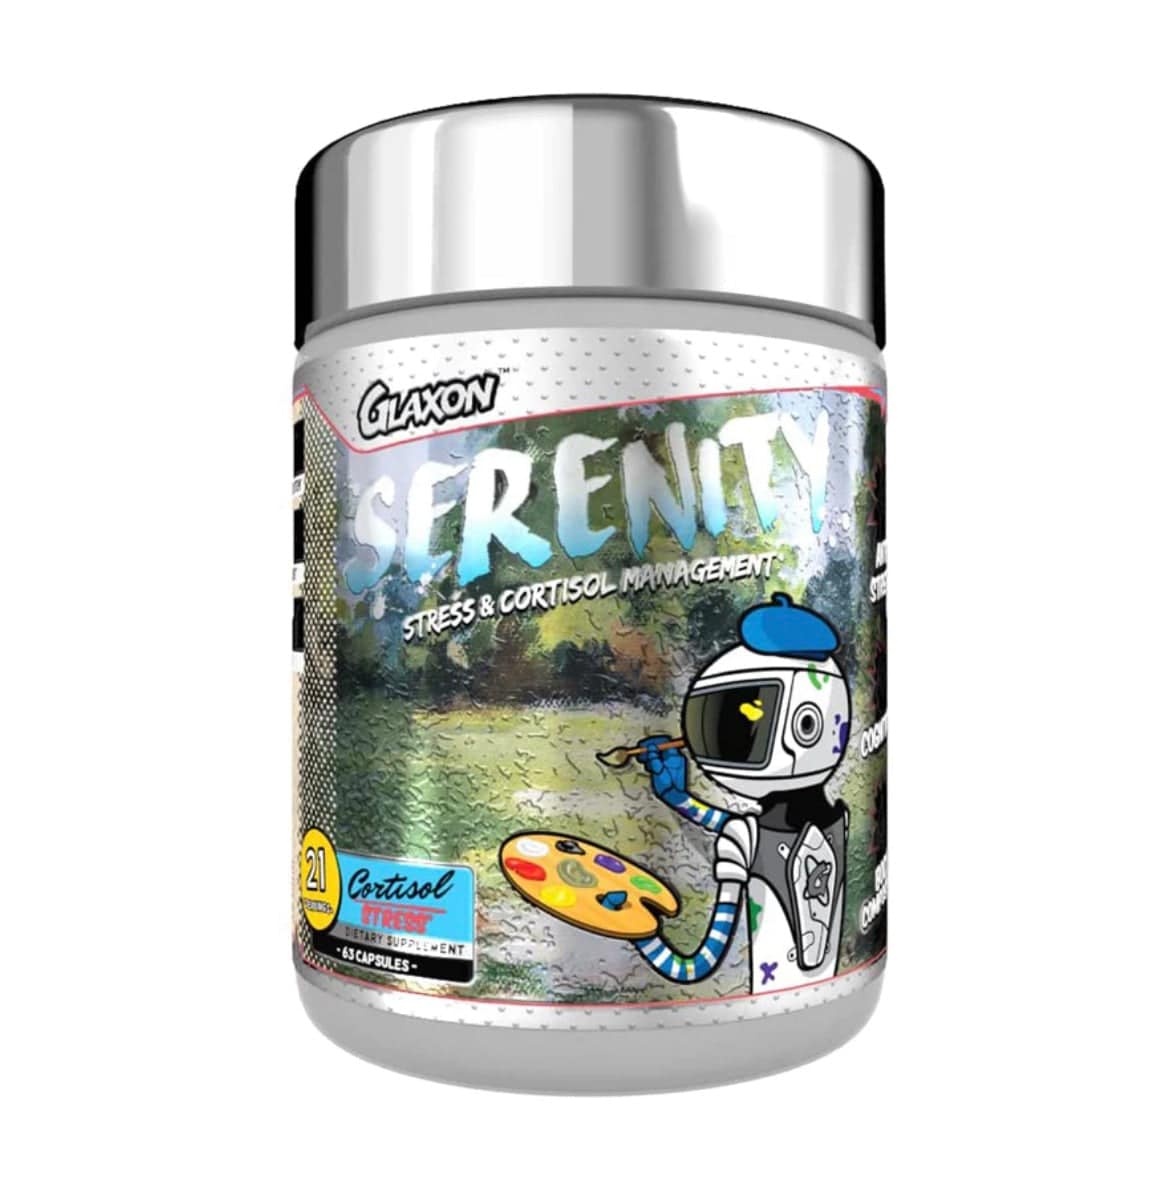 Serenity Stress Support - Glaxon - Prime Sports Nutrition